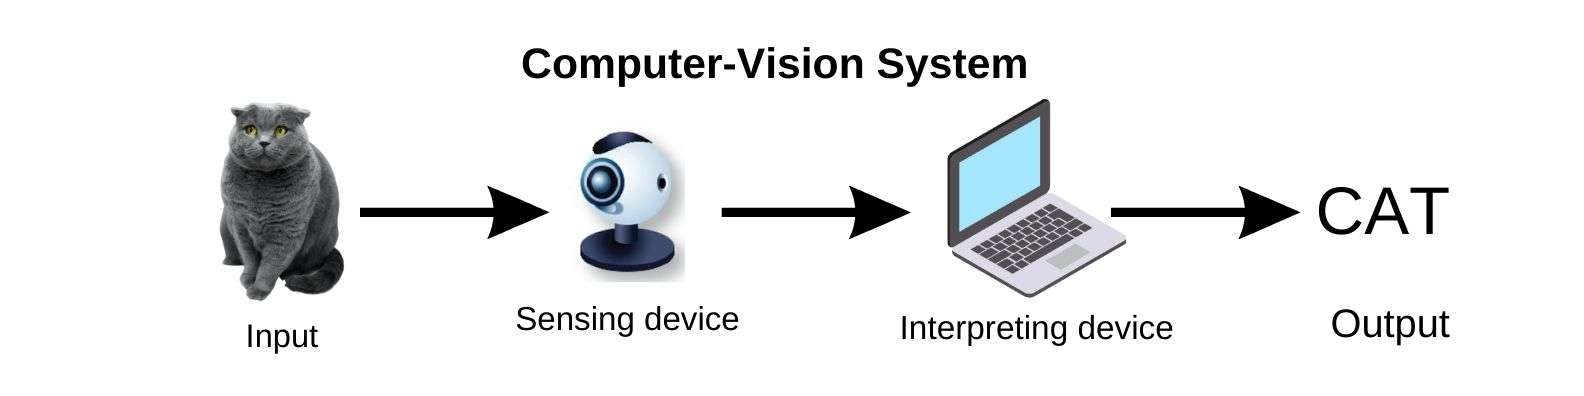 Computer Vision System